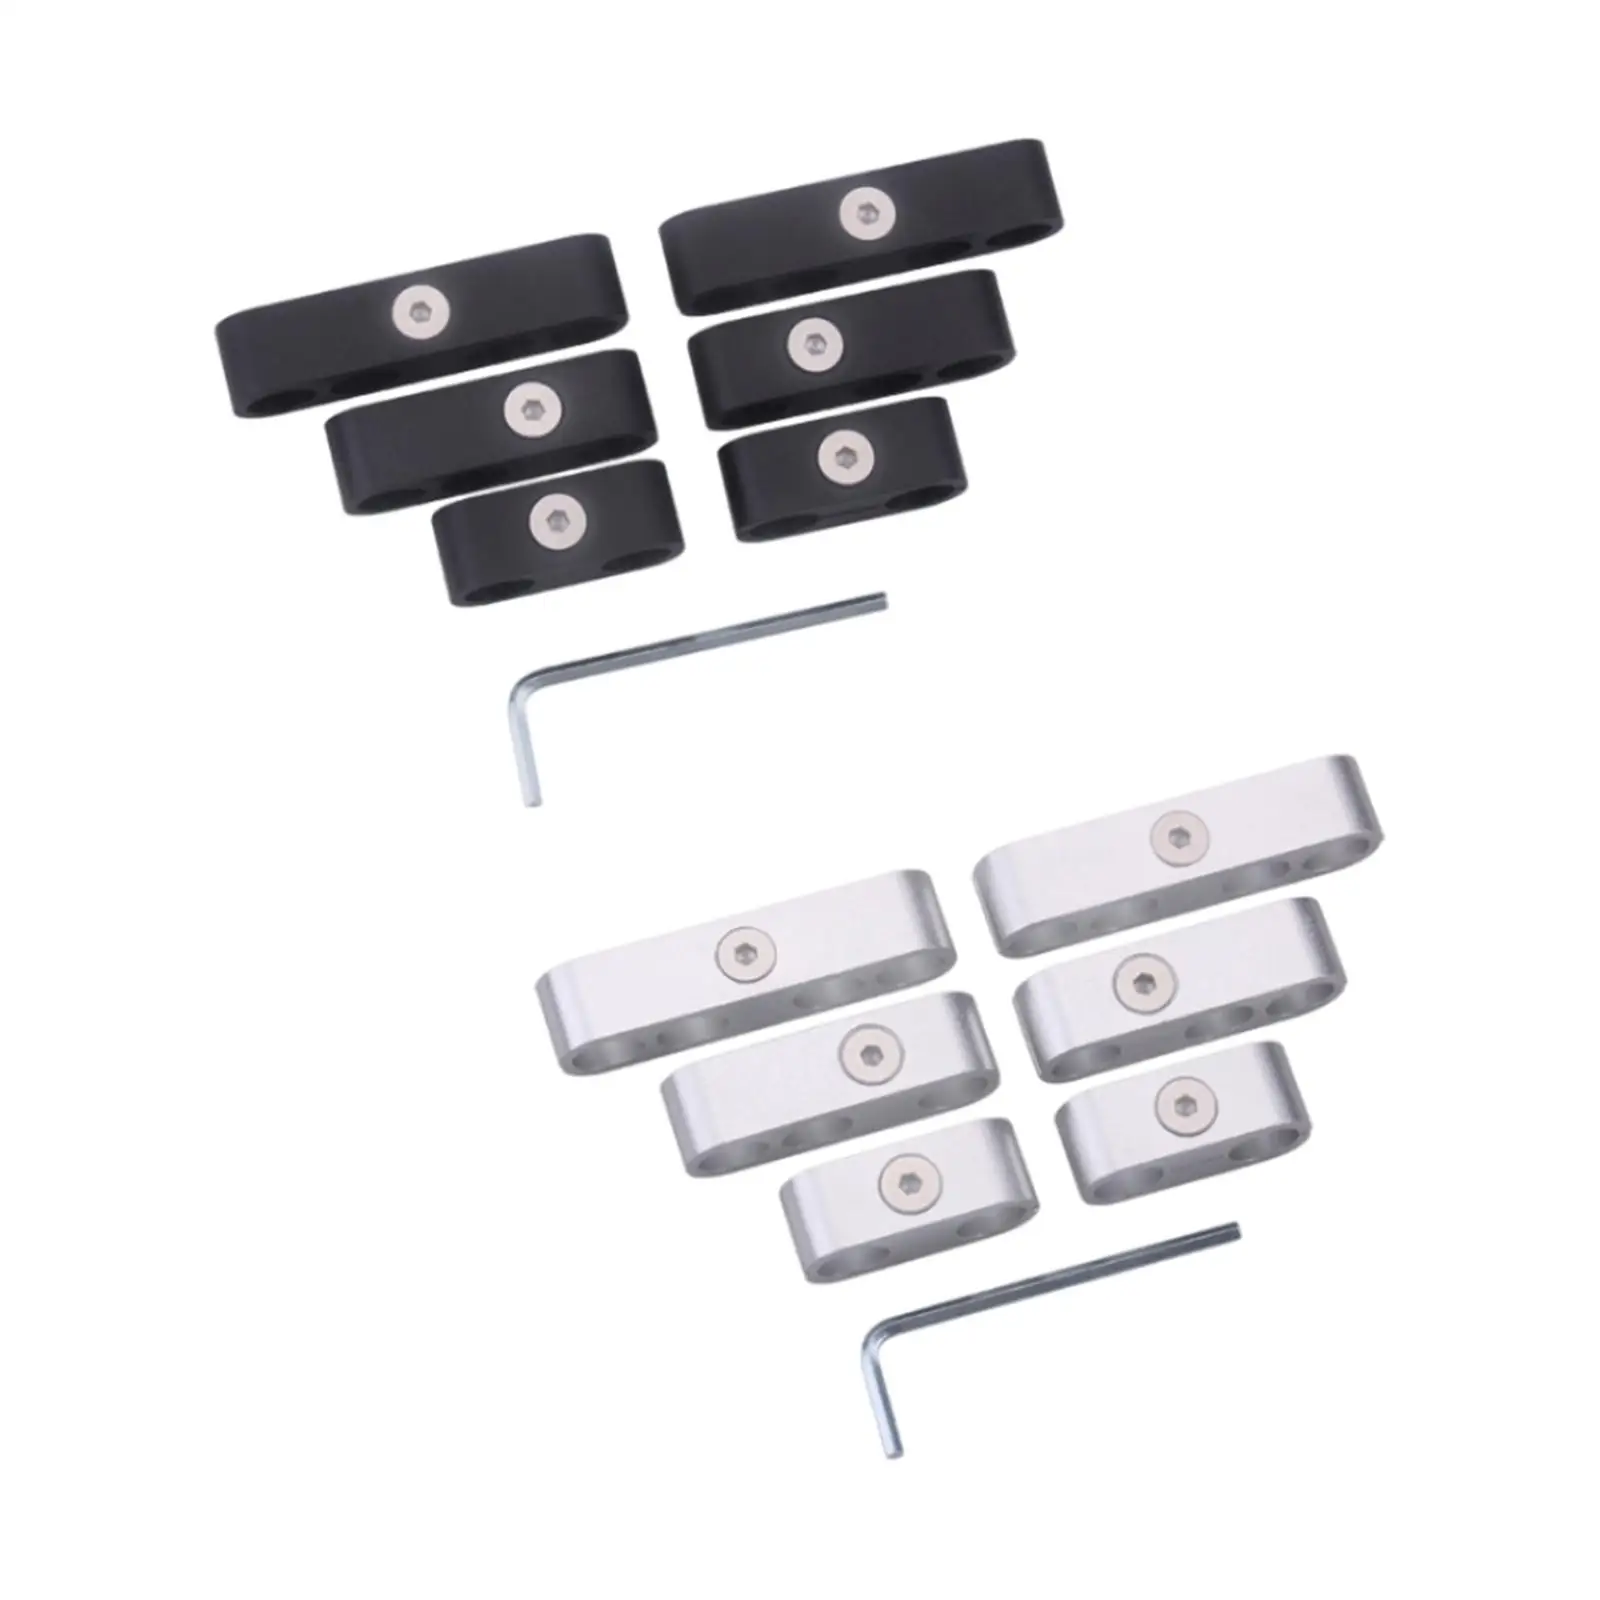 6x Engine Spark Plug Wire Separators Dividers Looms Easy to Install Accessories Durable High Performance with 1 Wrench